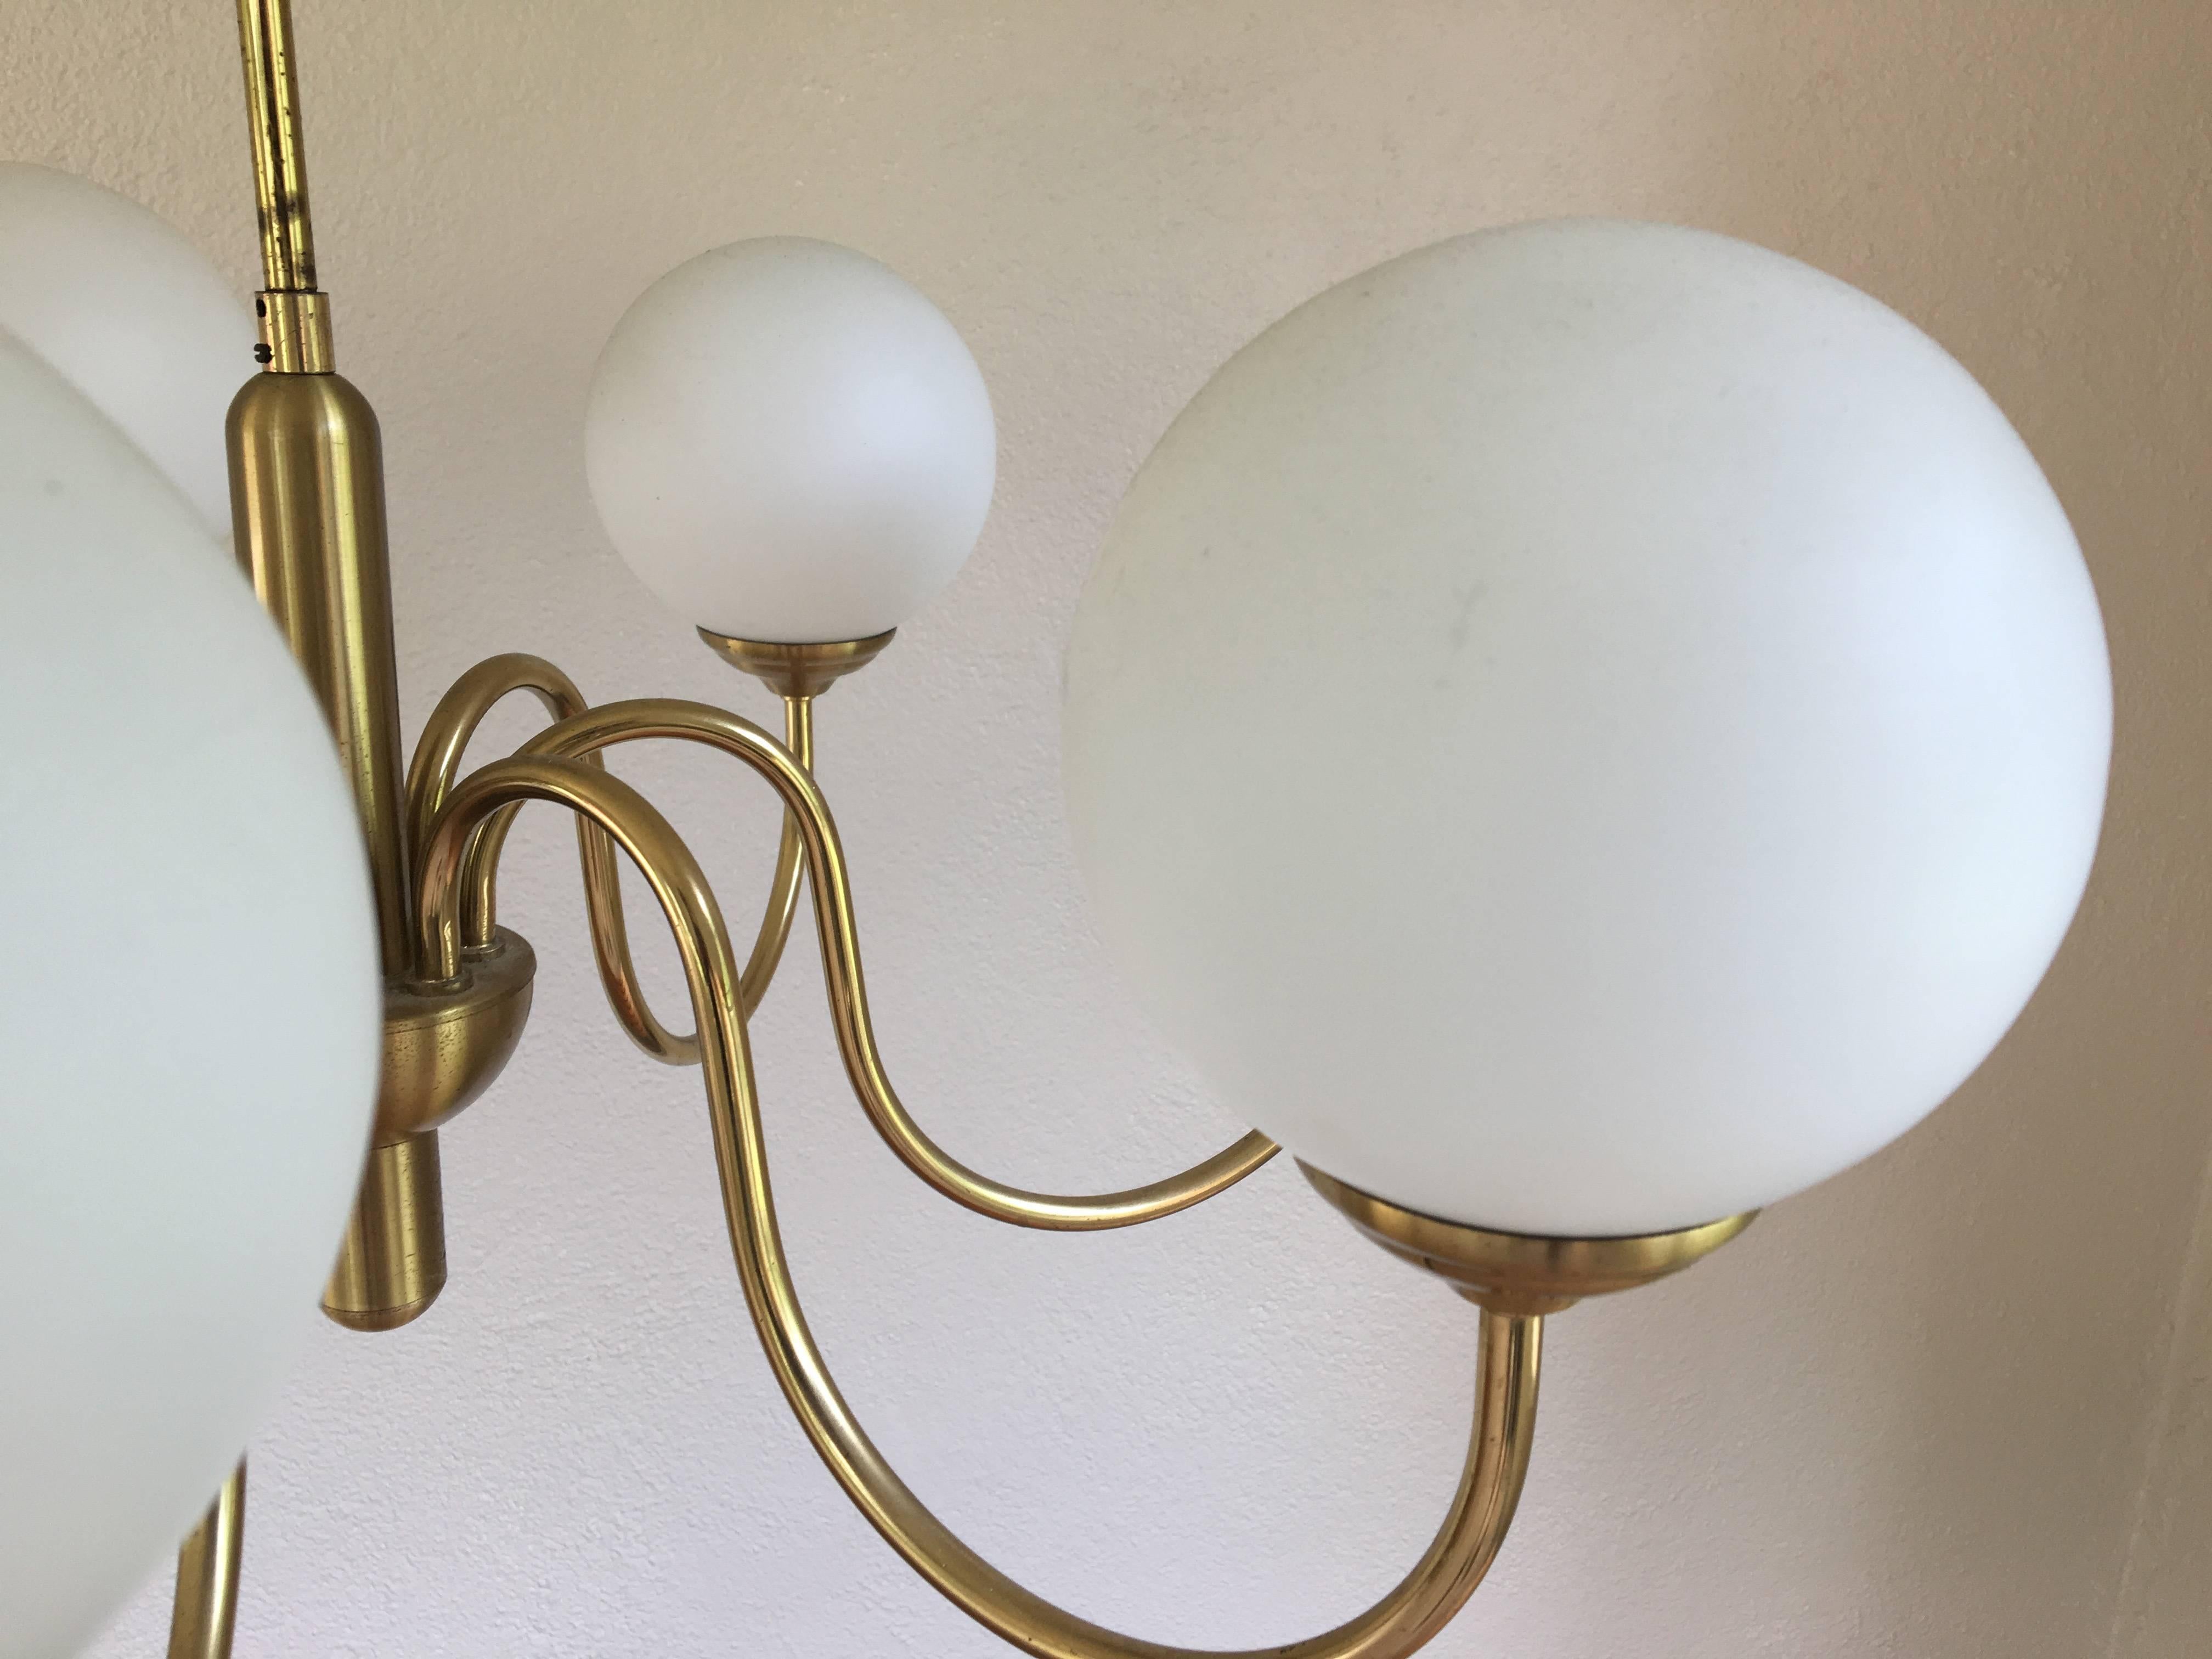 Beautiful seven-arm brass chandelier in the style of Angelo Lelli, Gino Sarfatti Arredoluce or Hans Bergström. Very heavy, solid construction. The brass has not been cleaned leaving the buyer to decide the patina.